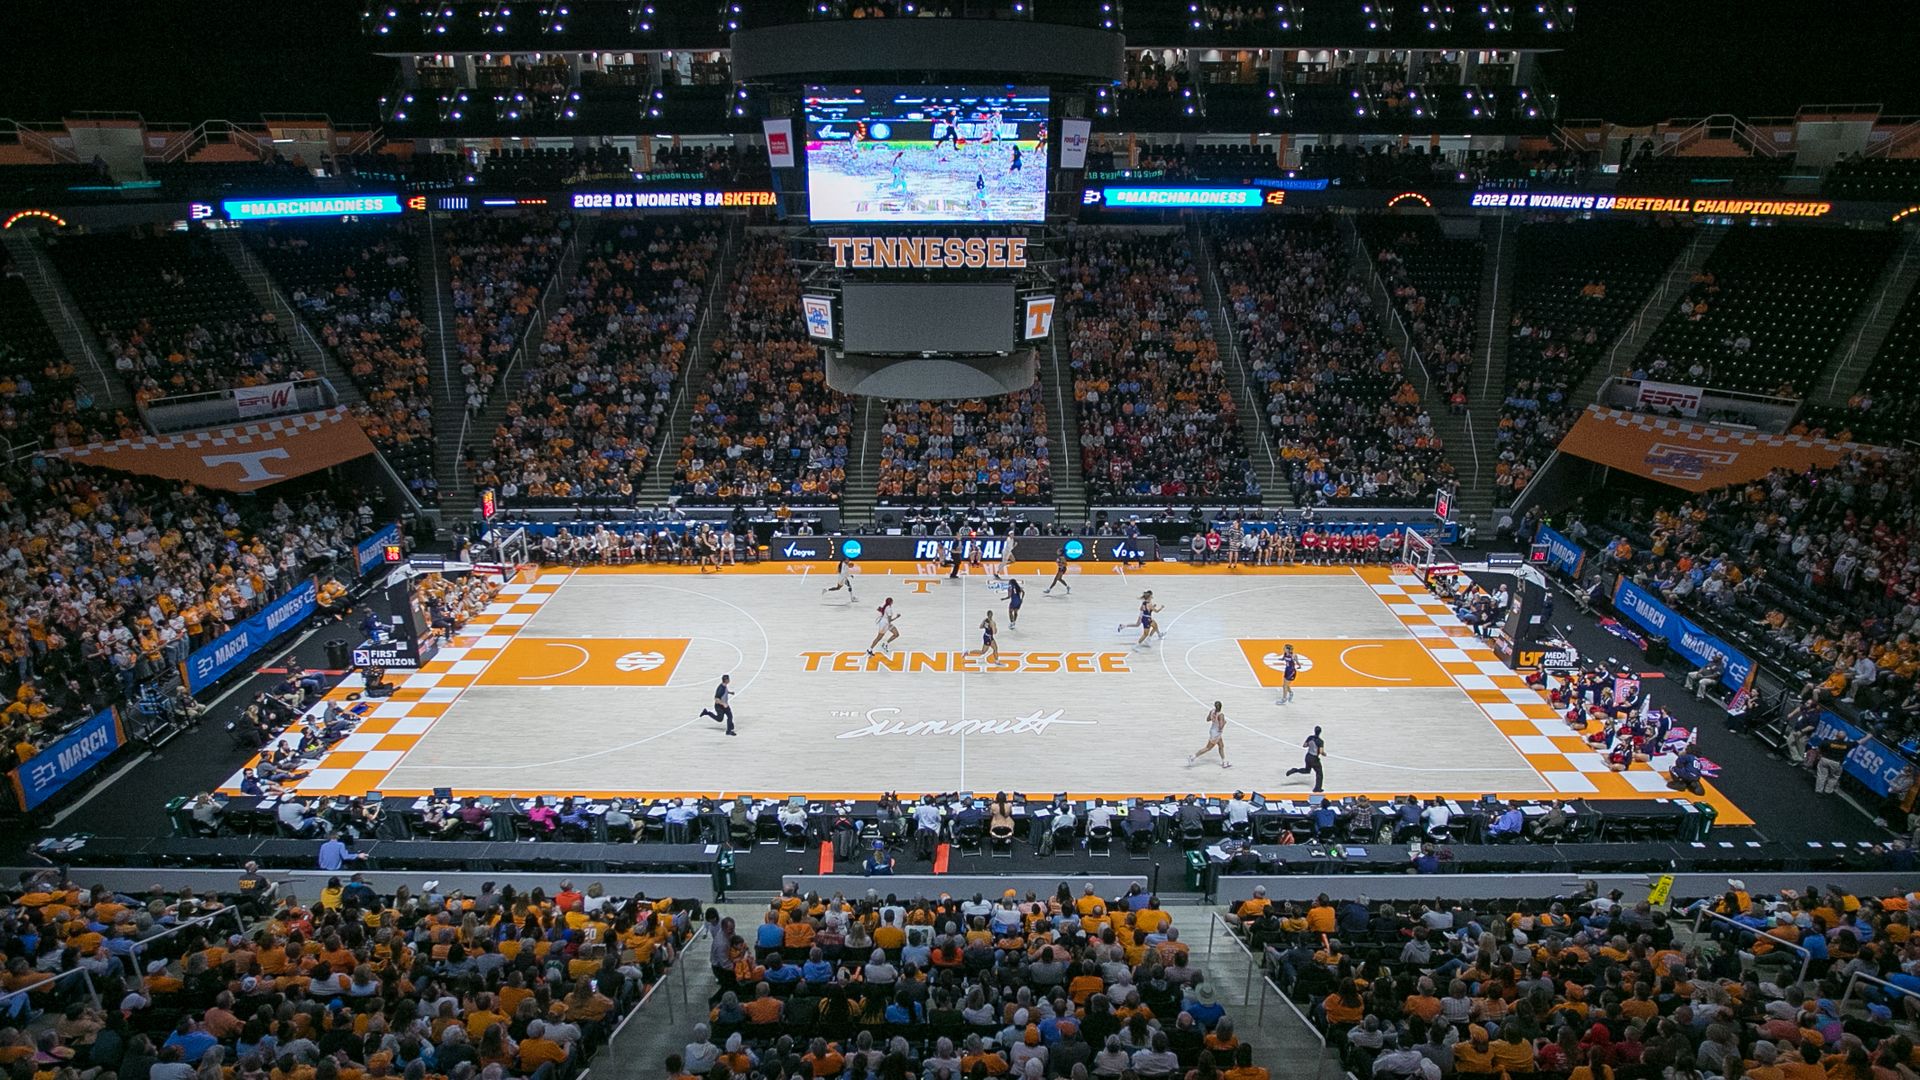 Tennessee basketball court